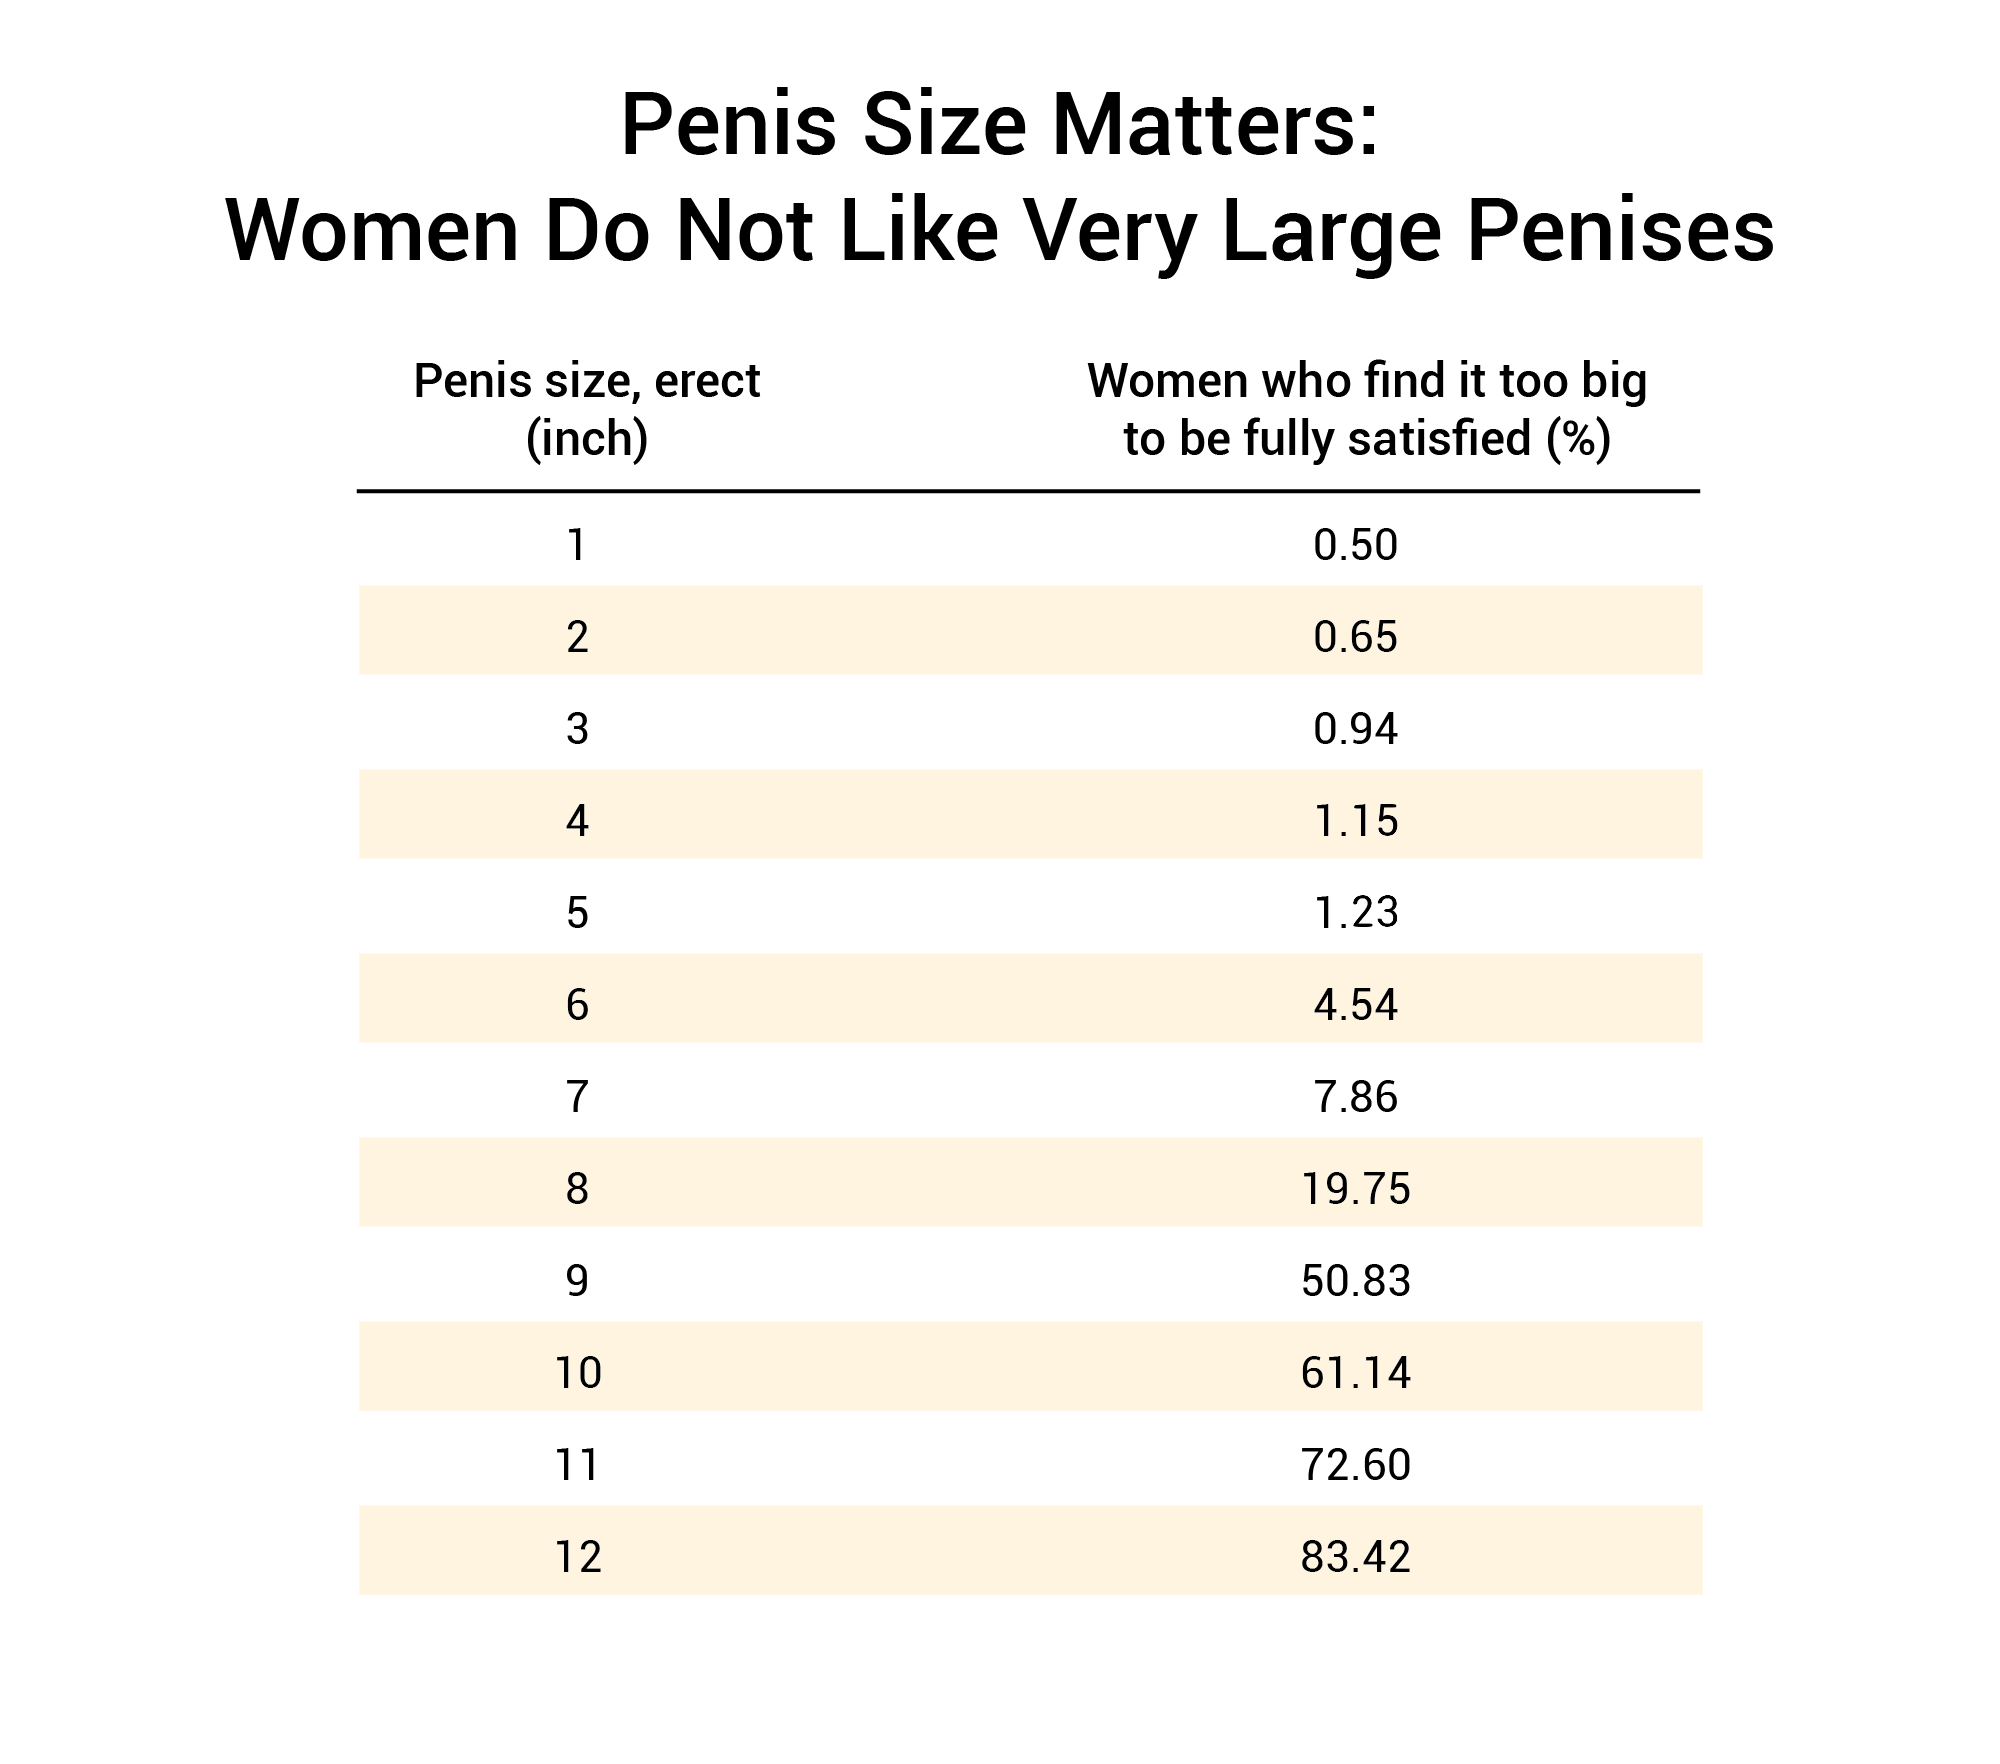 Does Size Matter? 91.7% Of Women Say It Does 1,387 Woman Study image